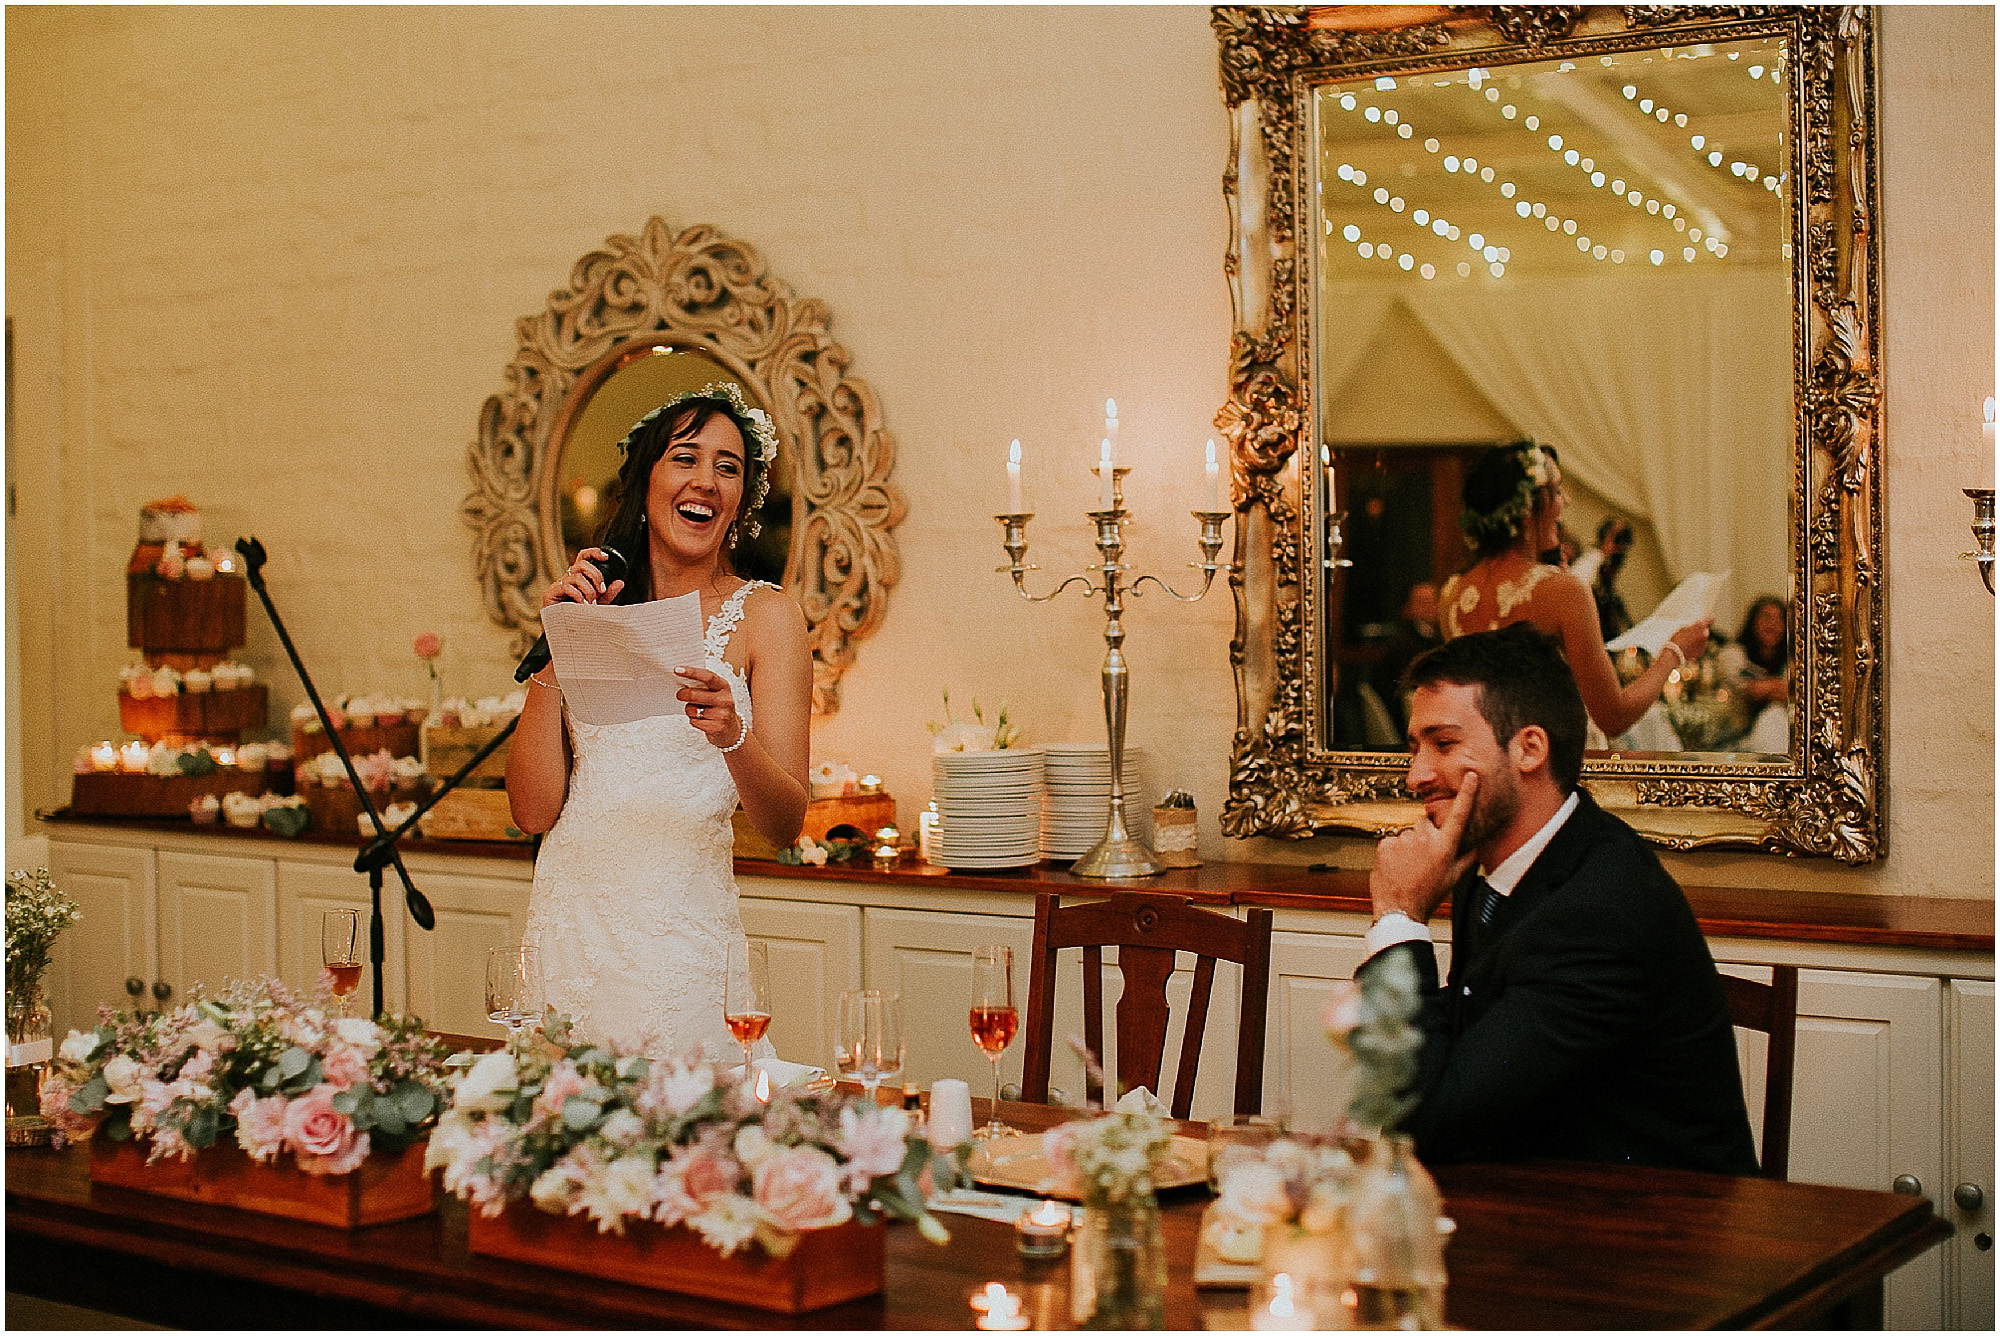 Outdoor-Forest-Destination-Wedding-Photographer-Maryke-Albertyn-Photography-Looks-Like-Film-Authentic-Alternative-Cape-Town-Pretoria-Silver-Sixpence-Dullstroom-reception